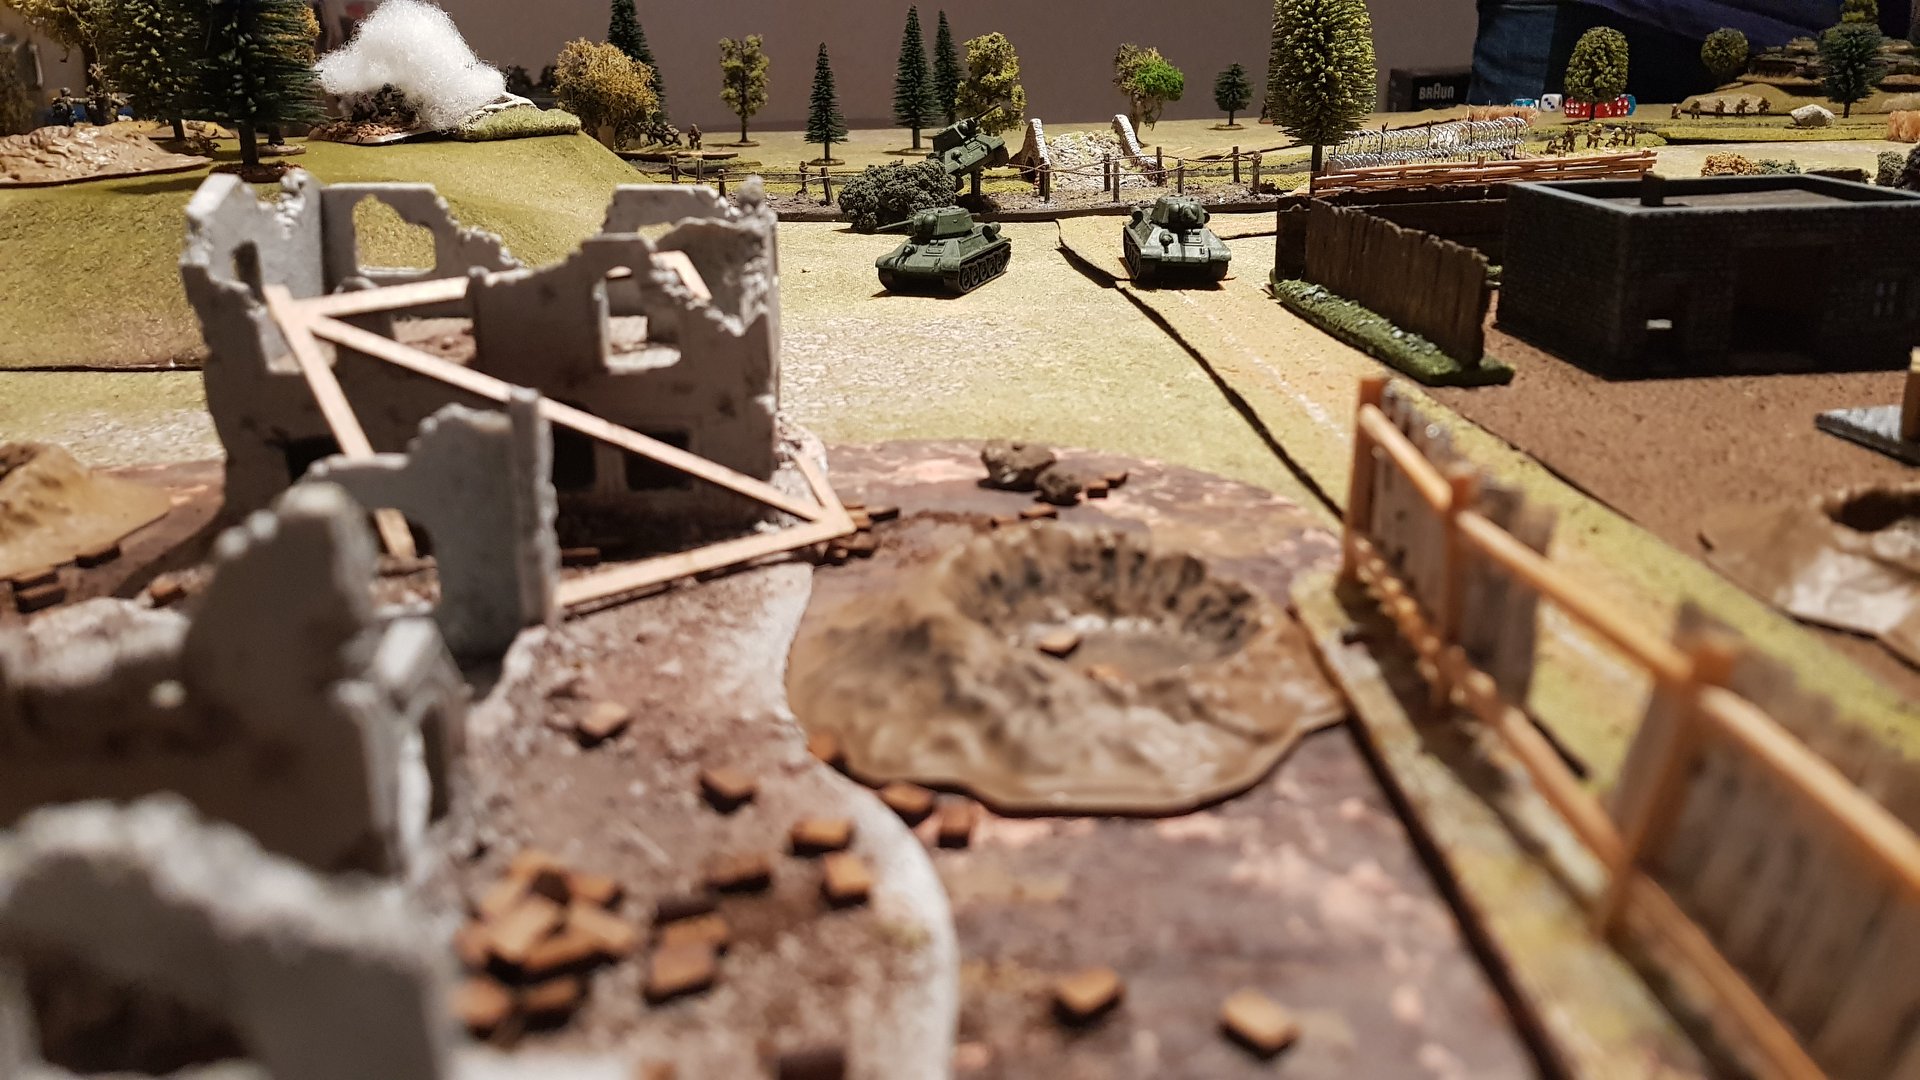 The Russians centre advances on the objective: the village and factory.